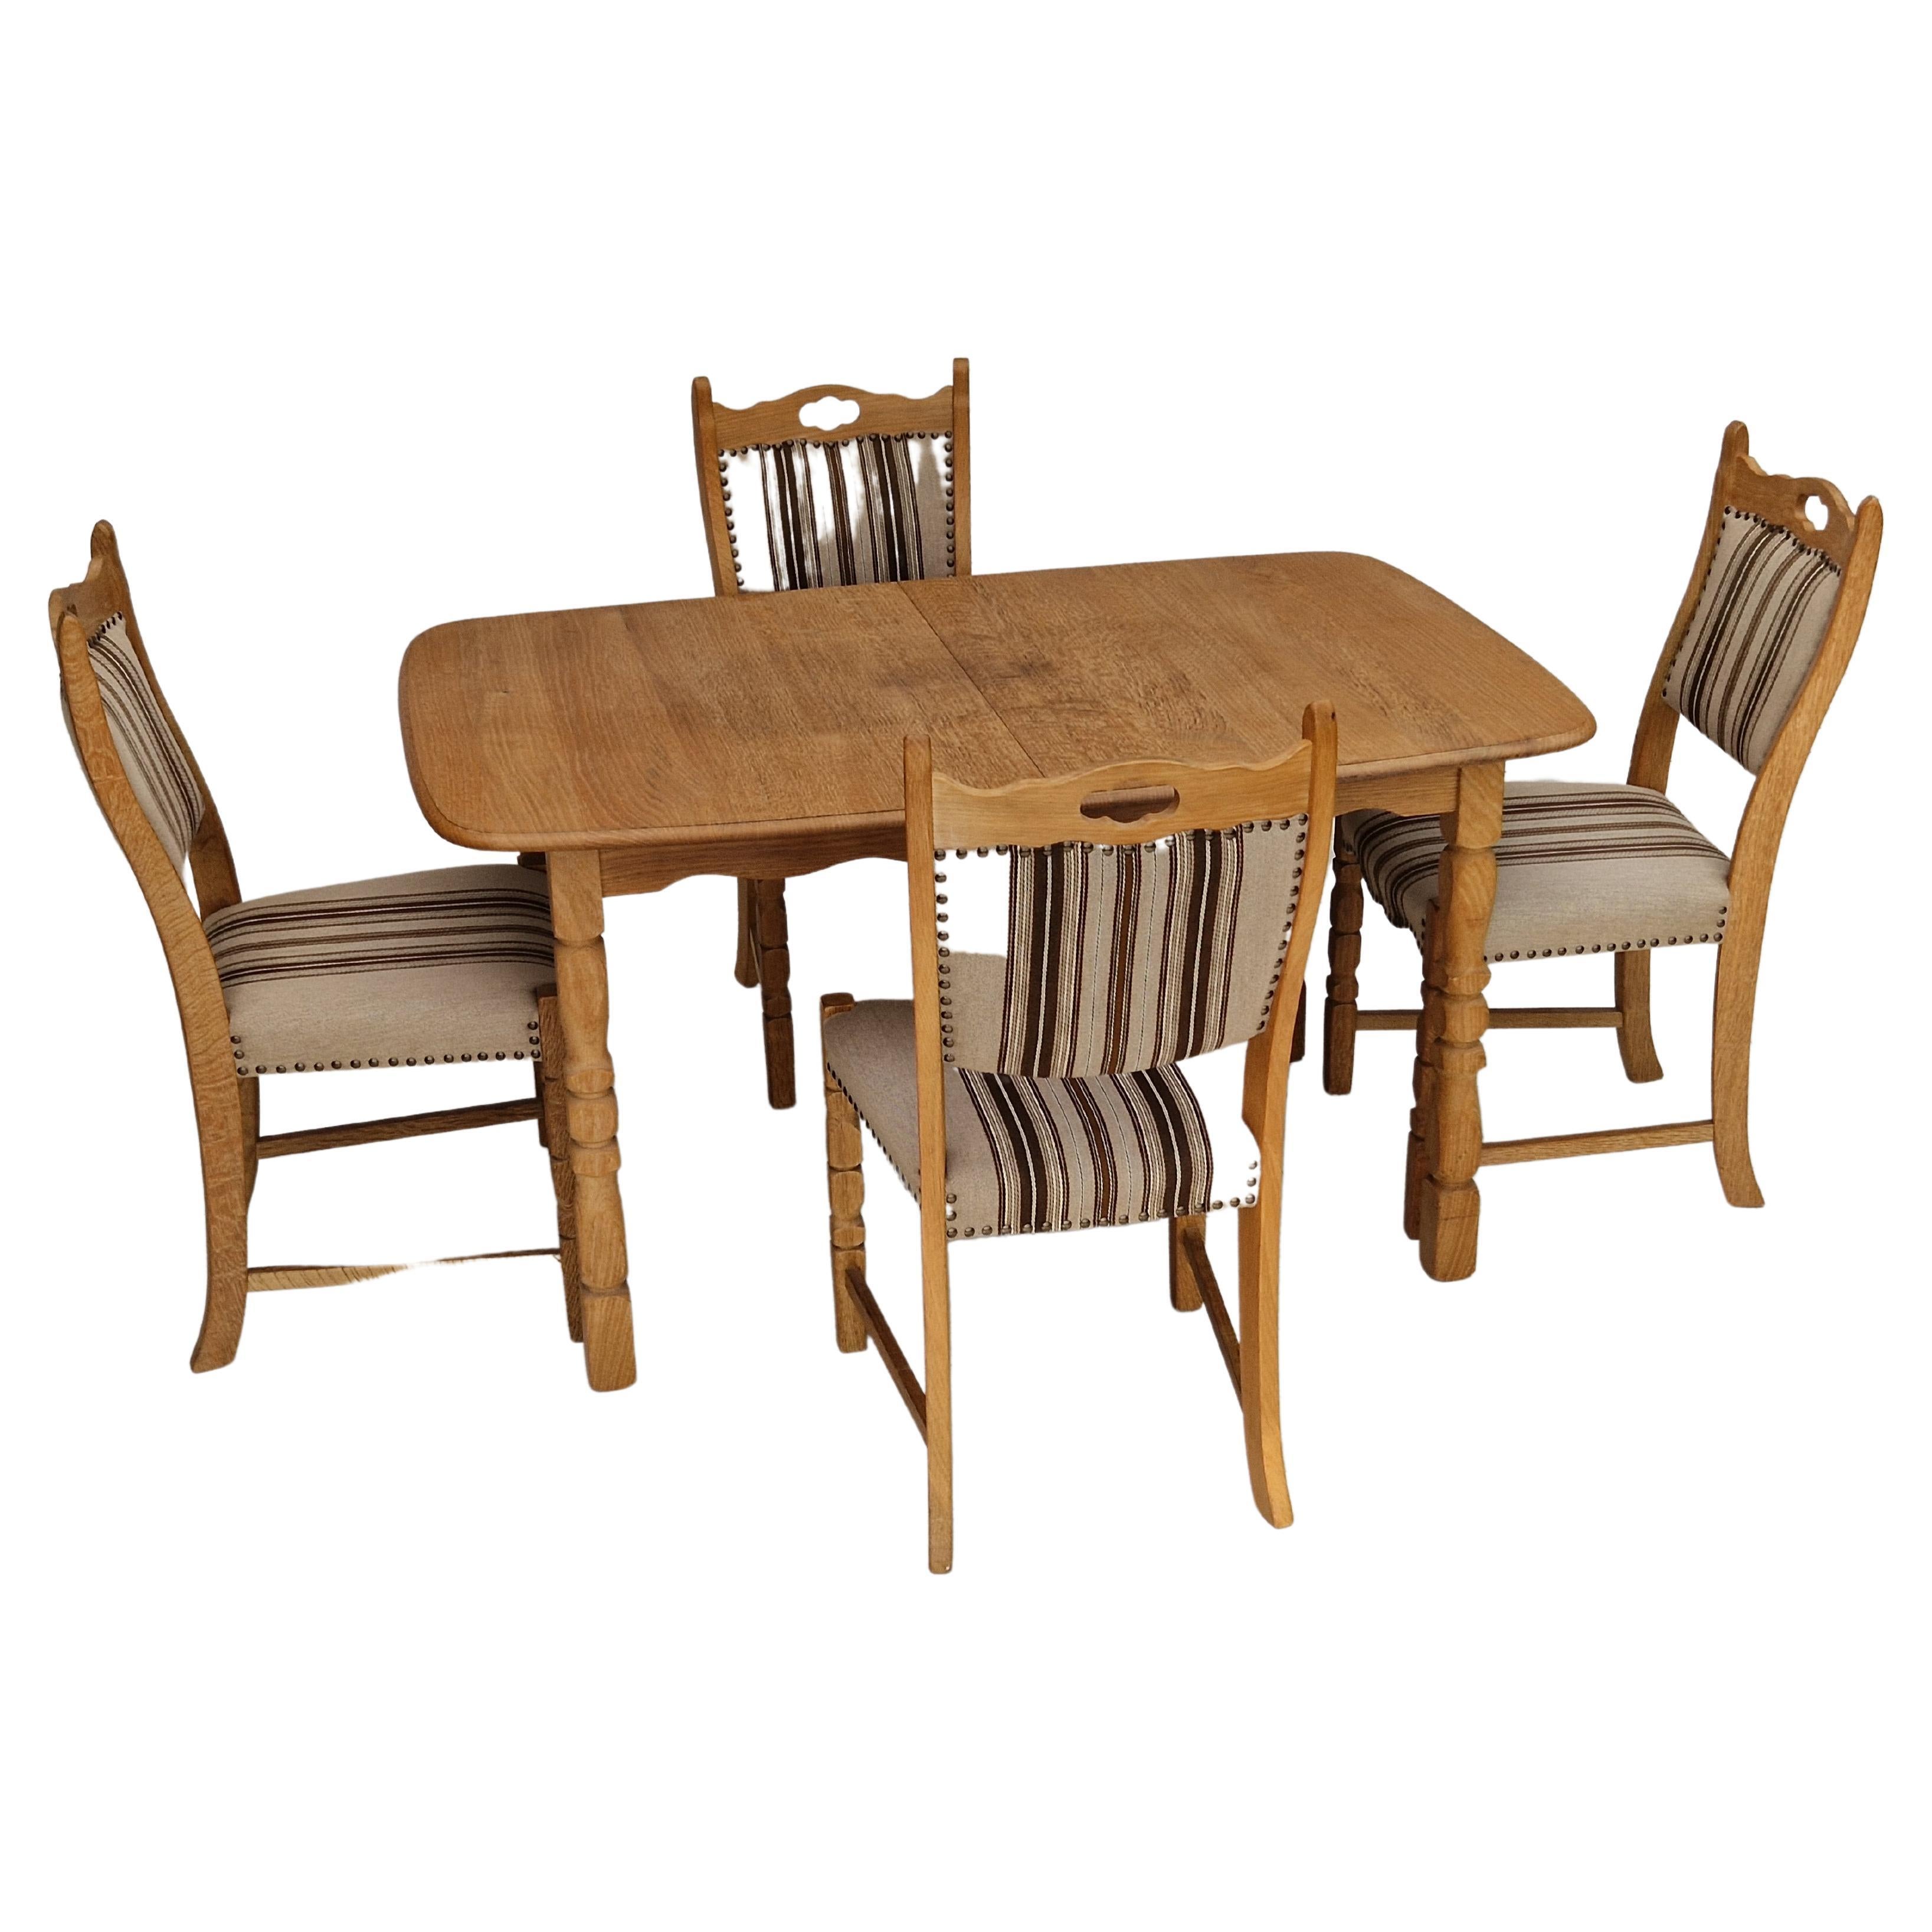 1970s, Danish Design, Dinning Set of Table and Four Chairs, Oak Wood, Wool